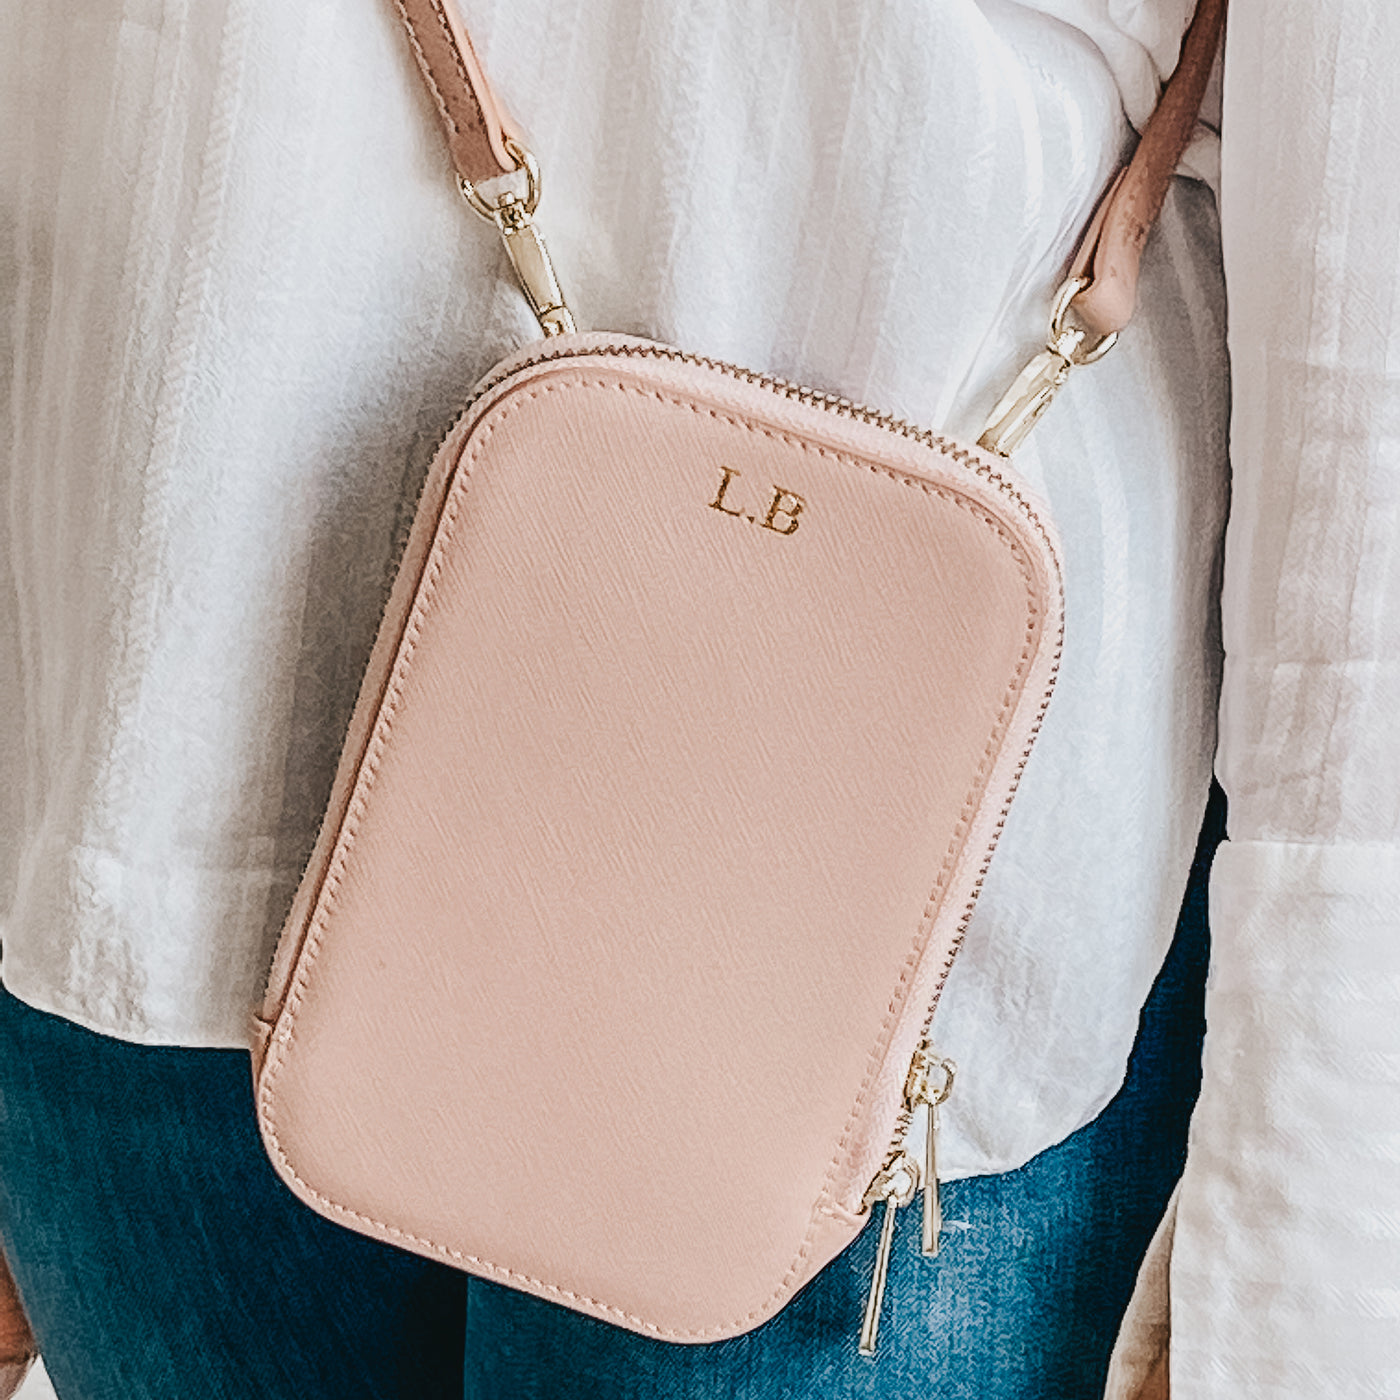 Personalised icy pink leather bag being held against a white shirt and blue jeans